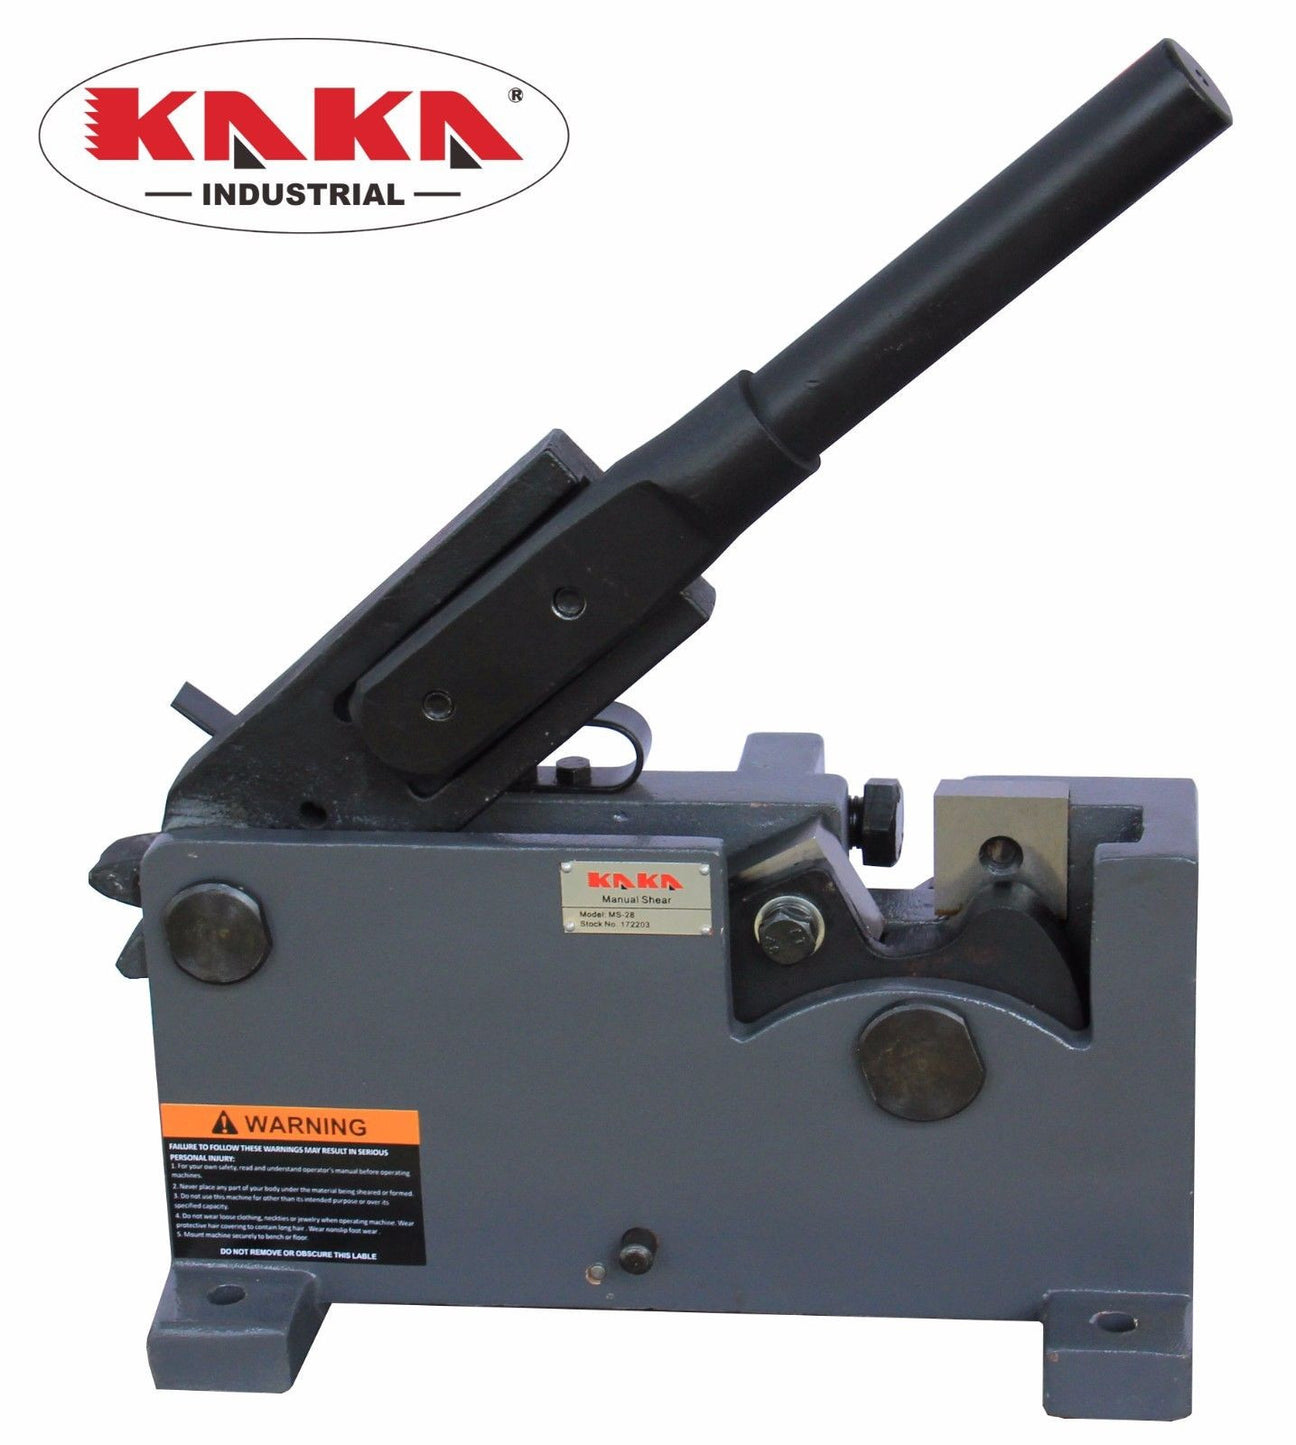 KAKA Industrial MS-24 24mm Metal Shears, Solid Design and Versatility